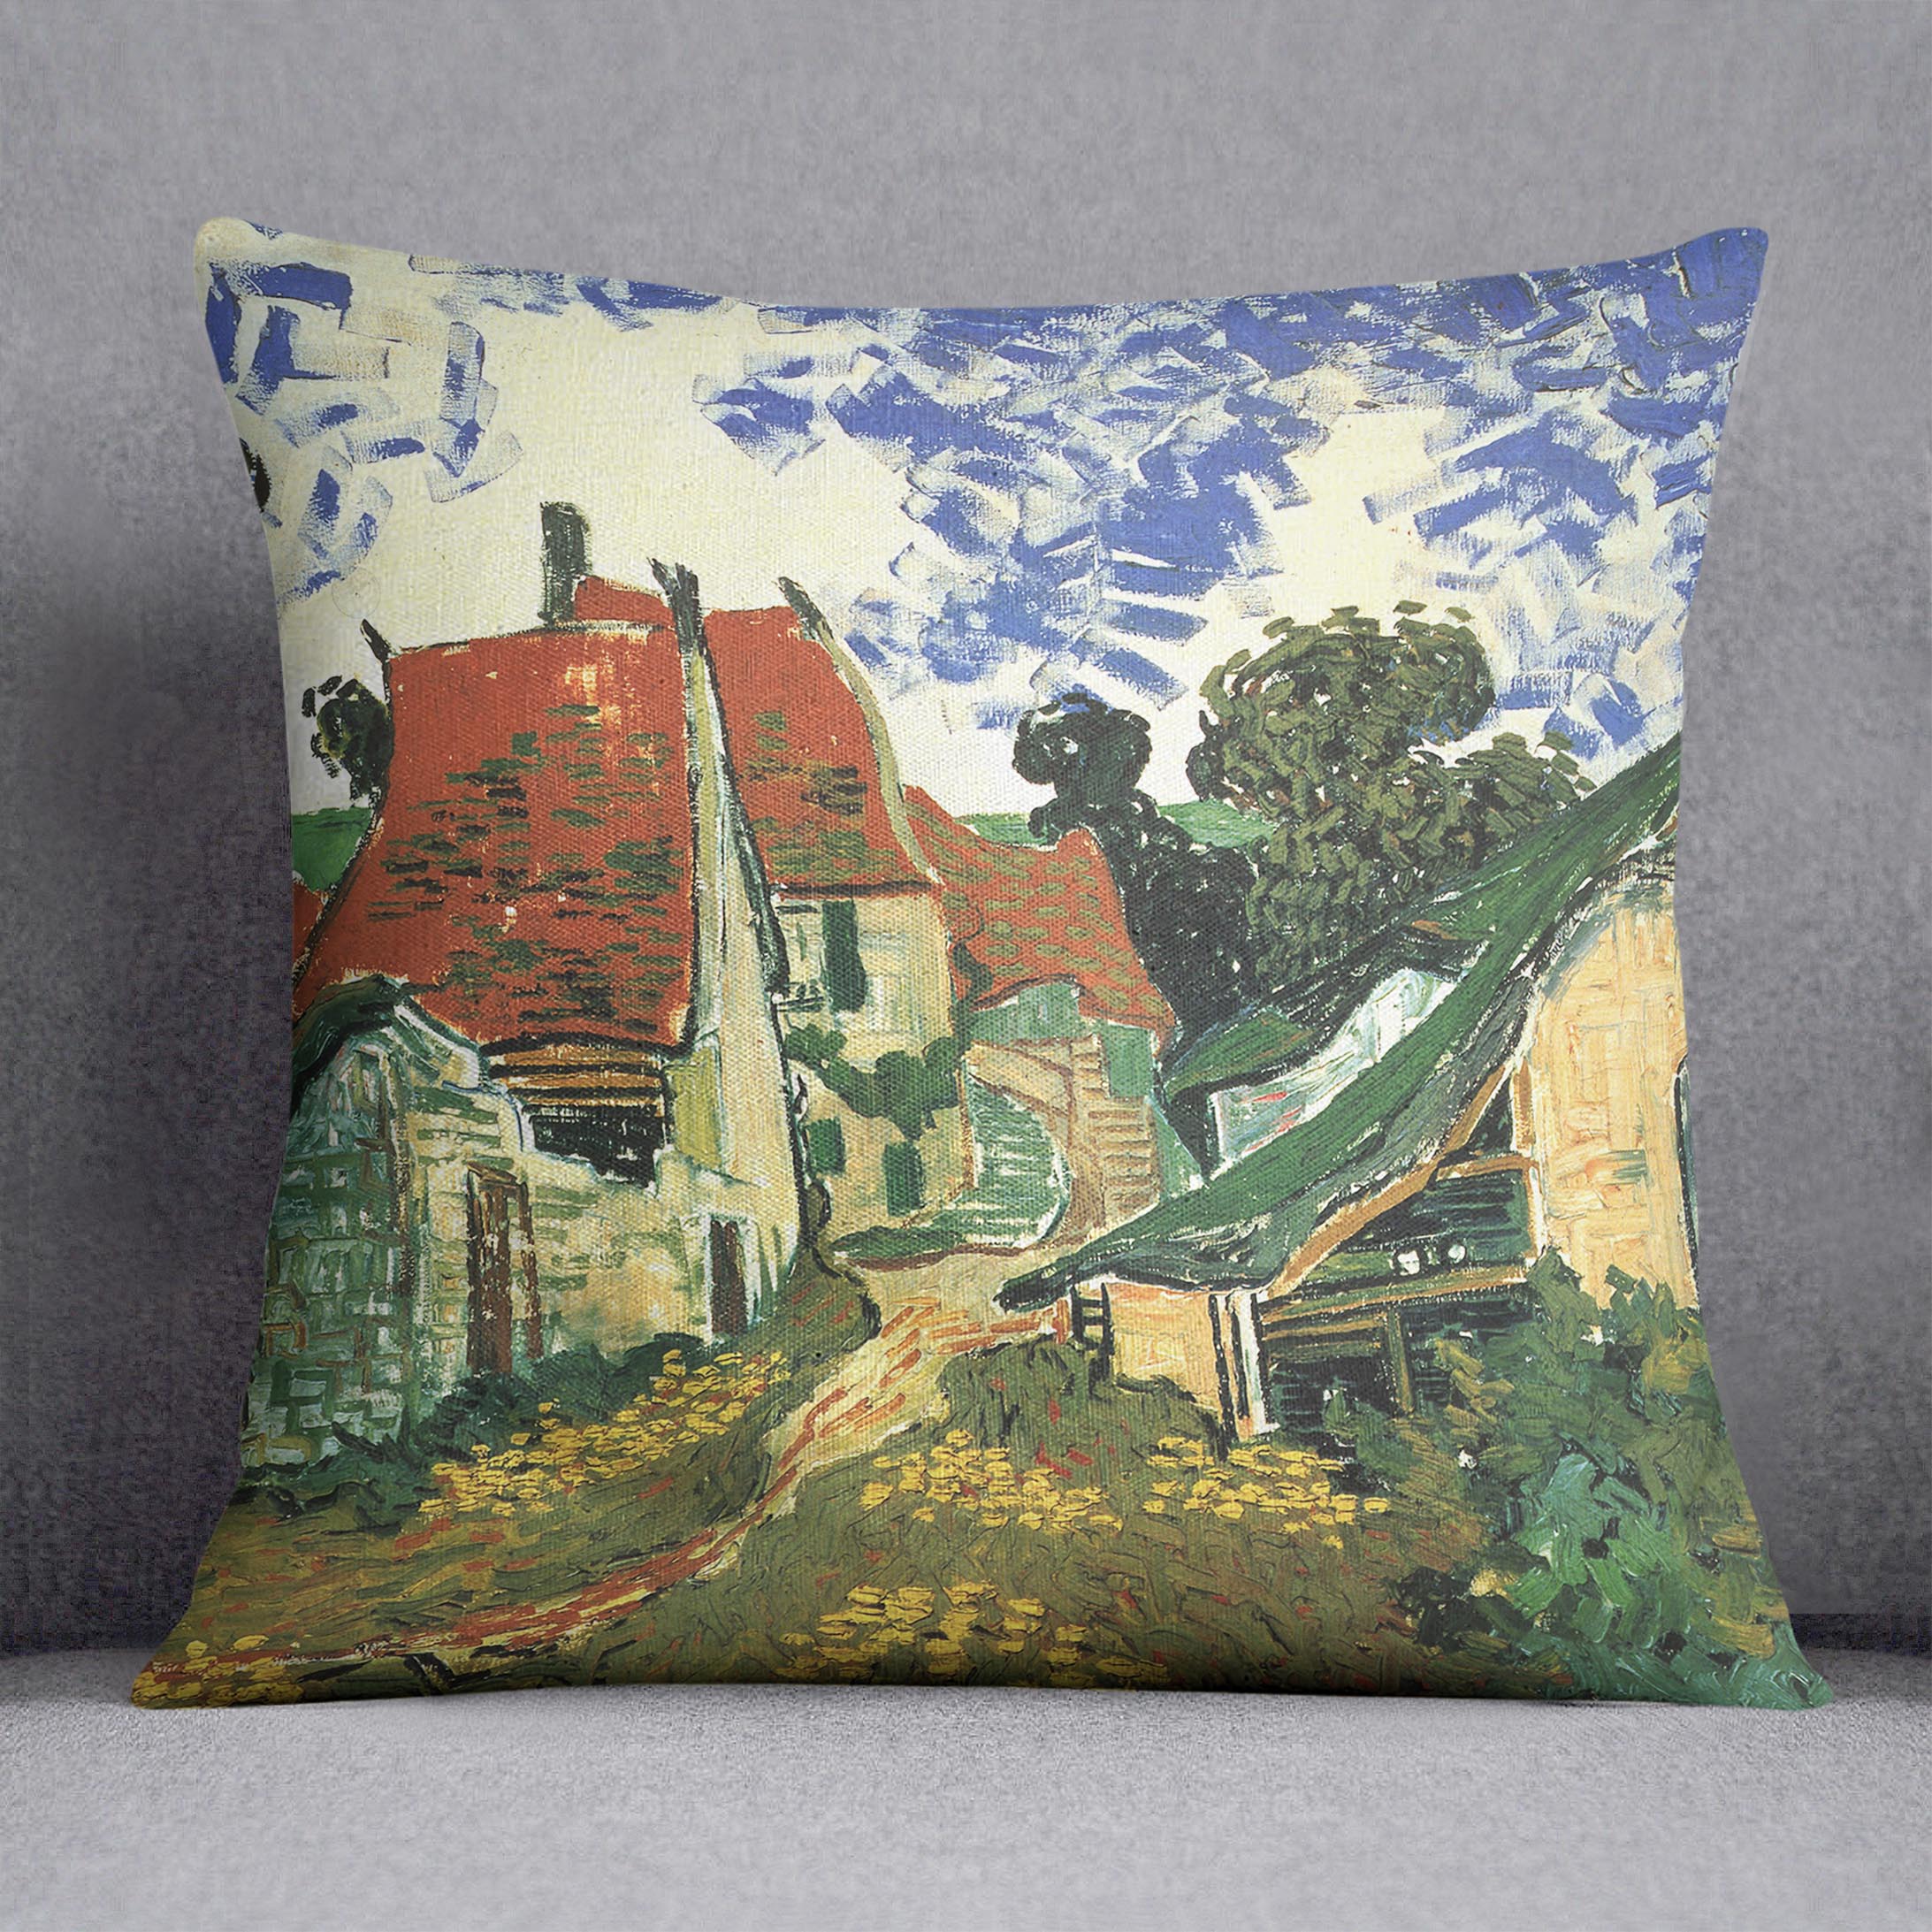 Villages Street in Auvers by Van Gogh Cushion